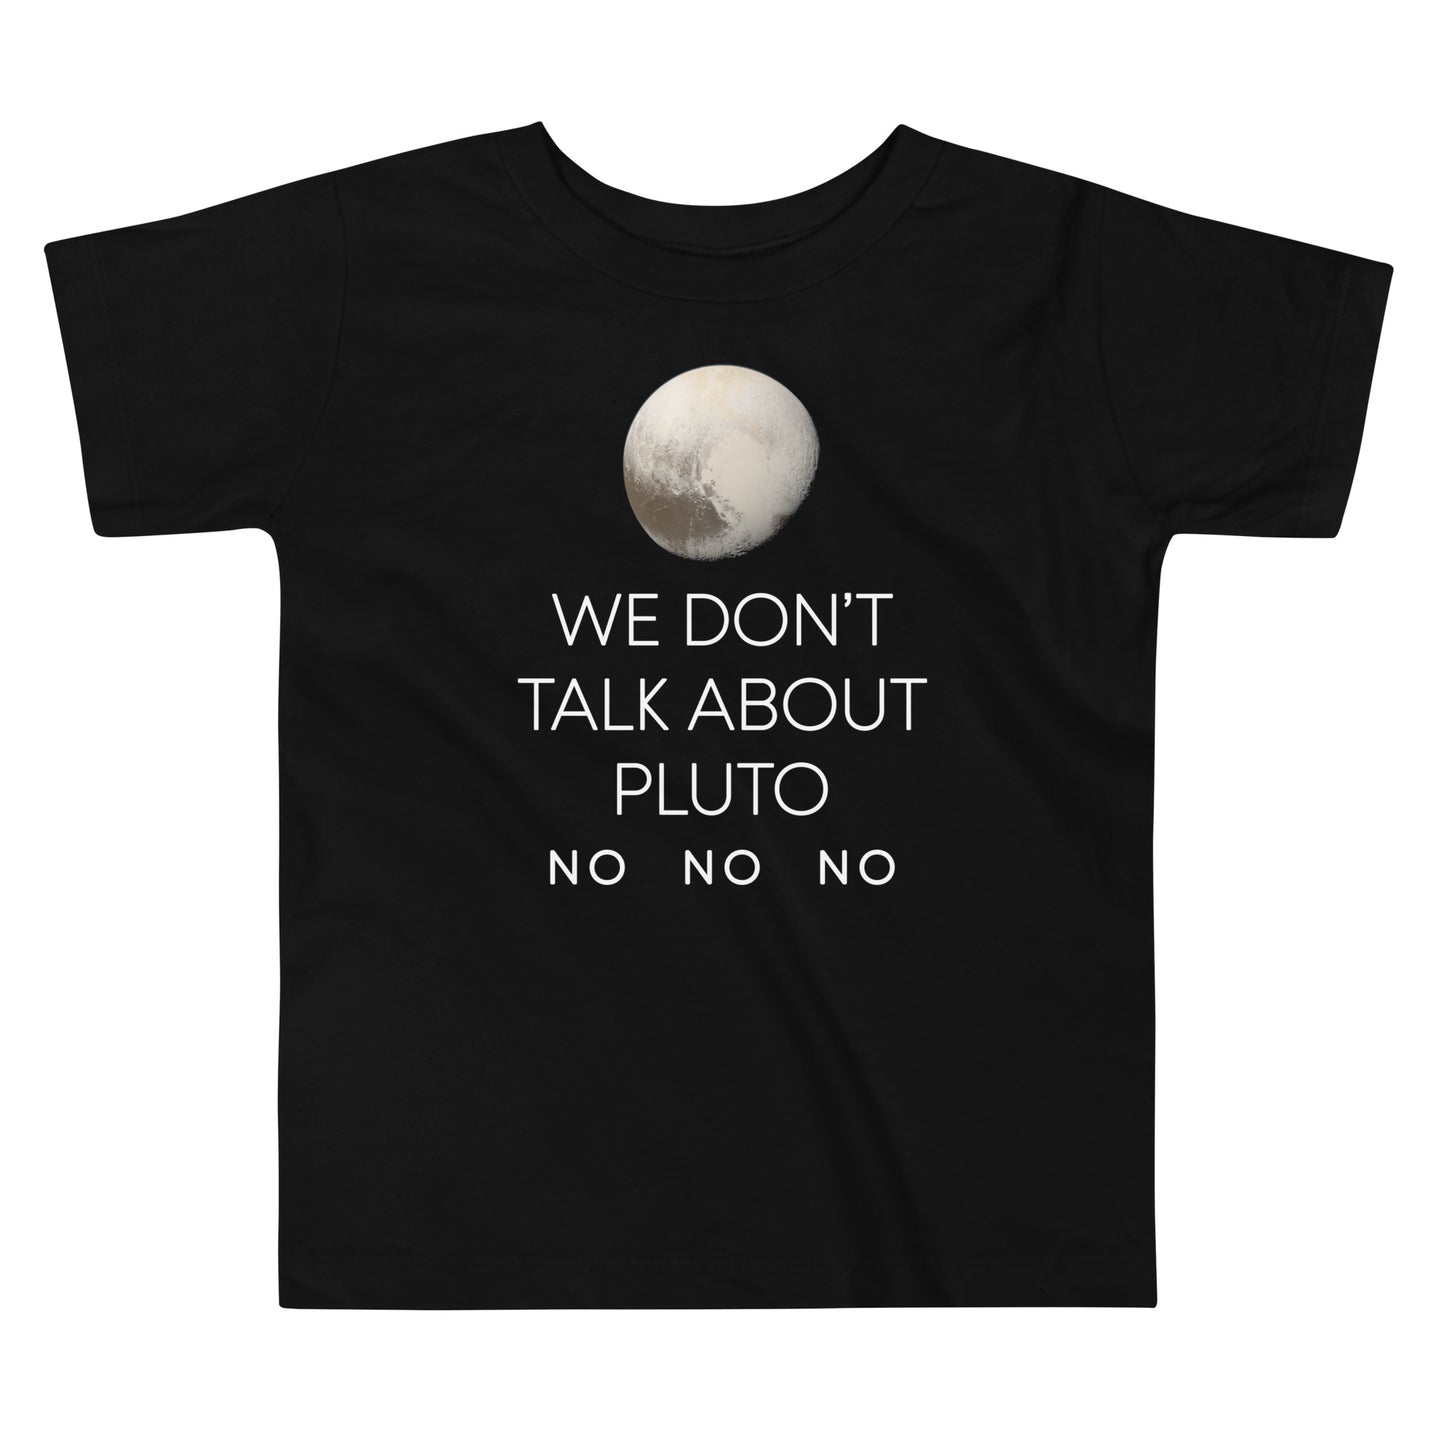 We Don't Talk About Pluto Kid's Toddler Tee